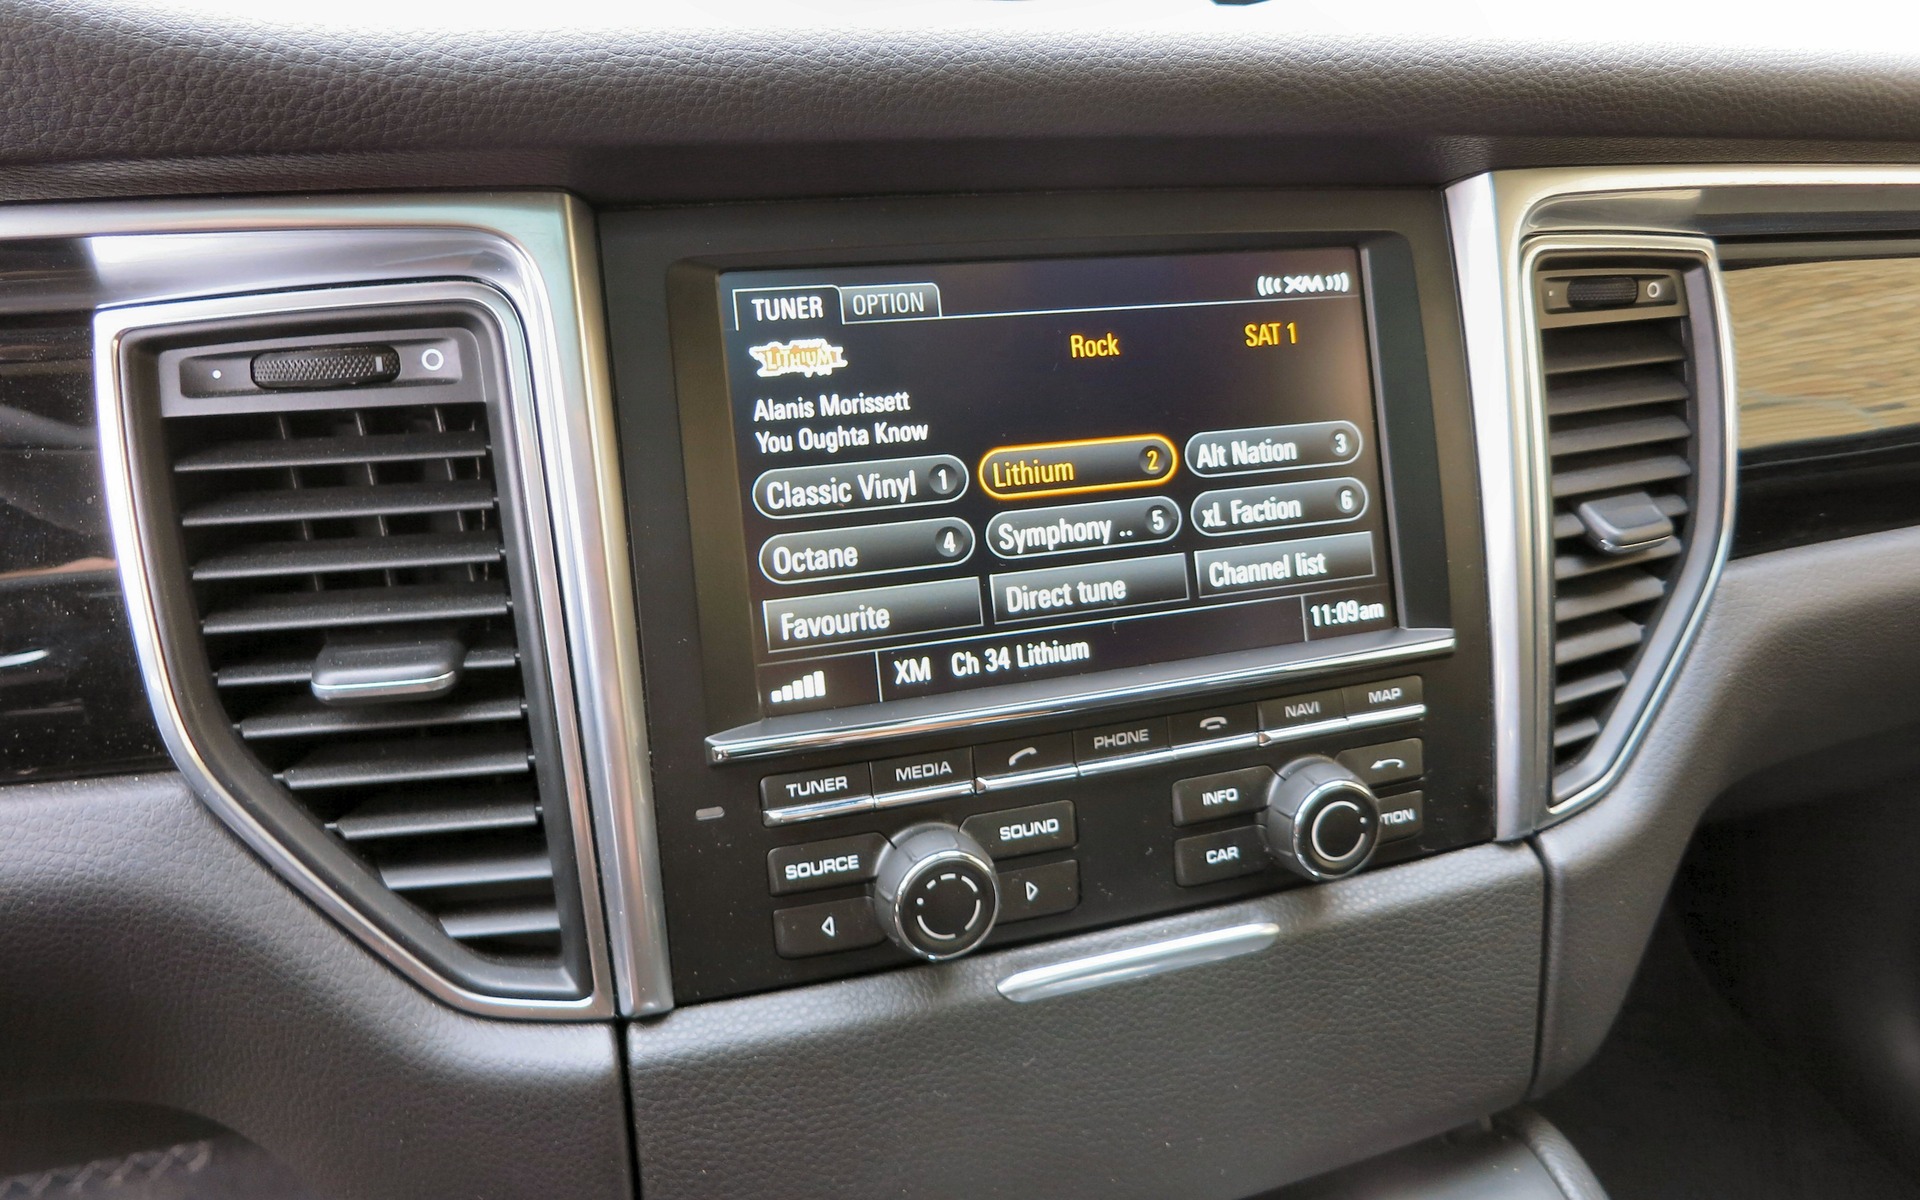 The touchscreen interface is logical, if not flashy.